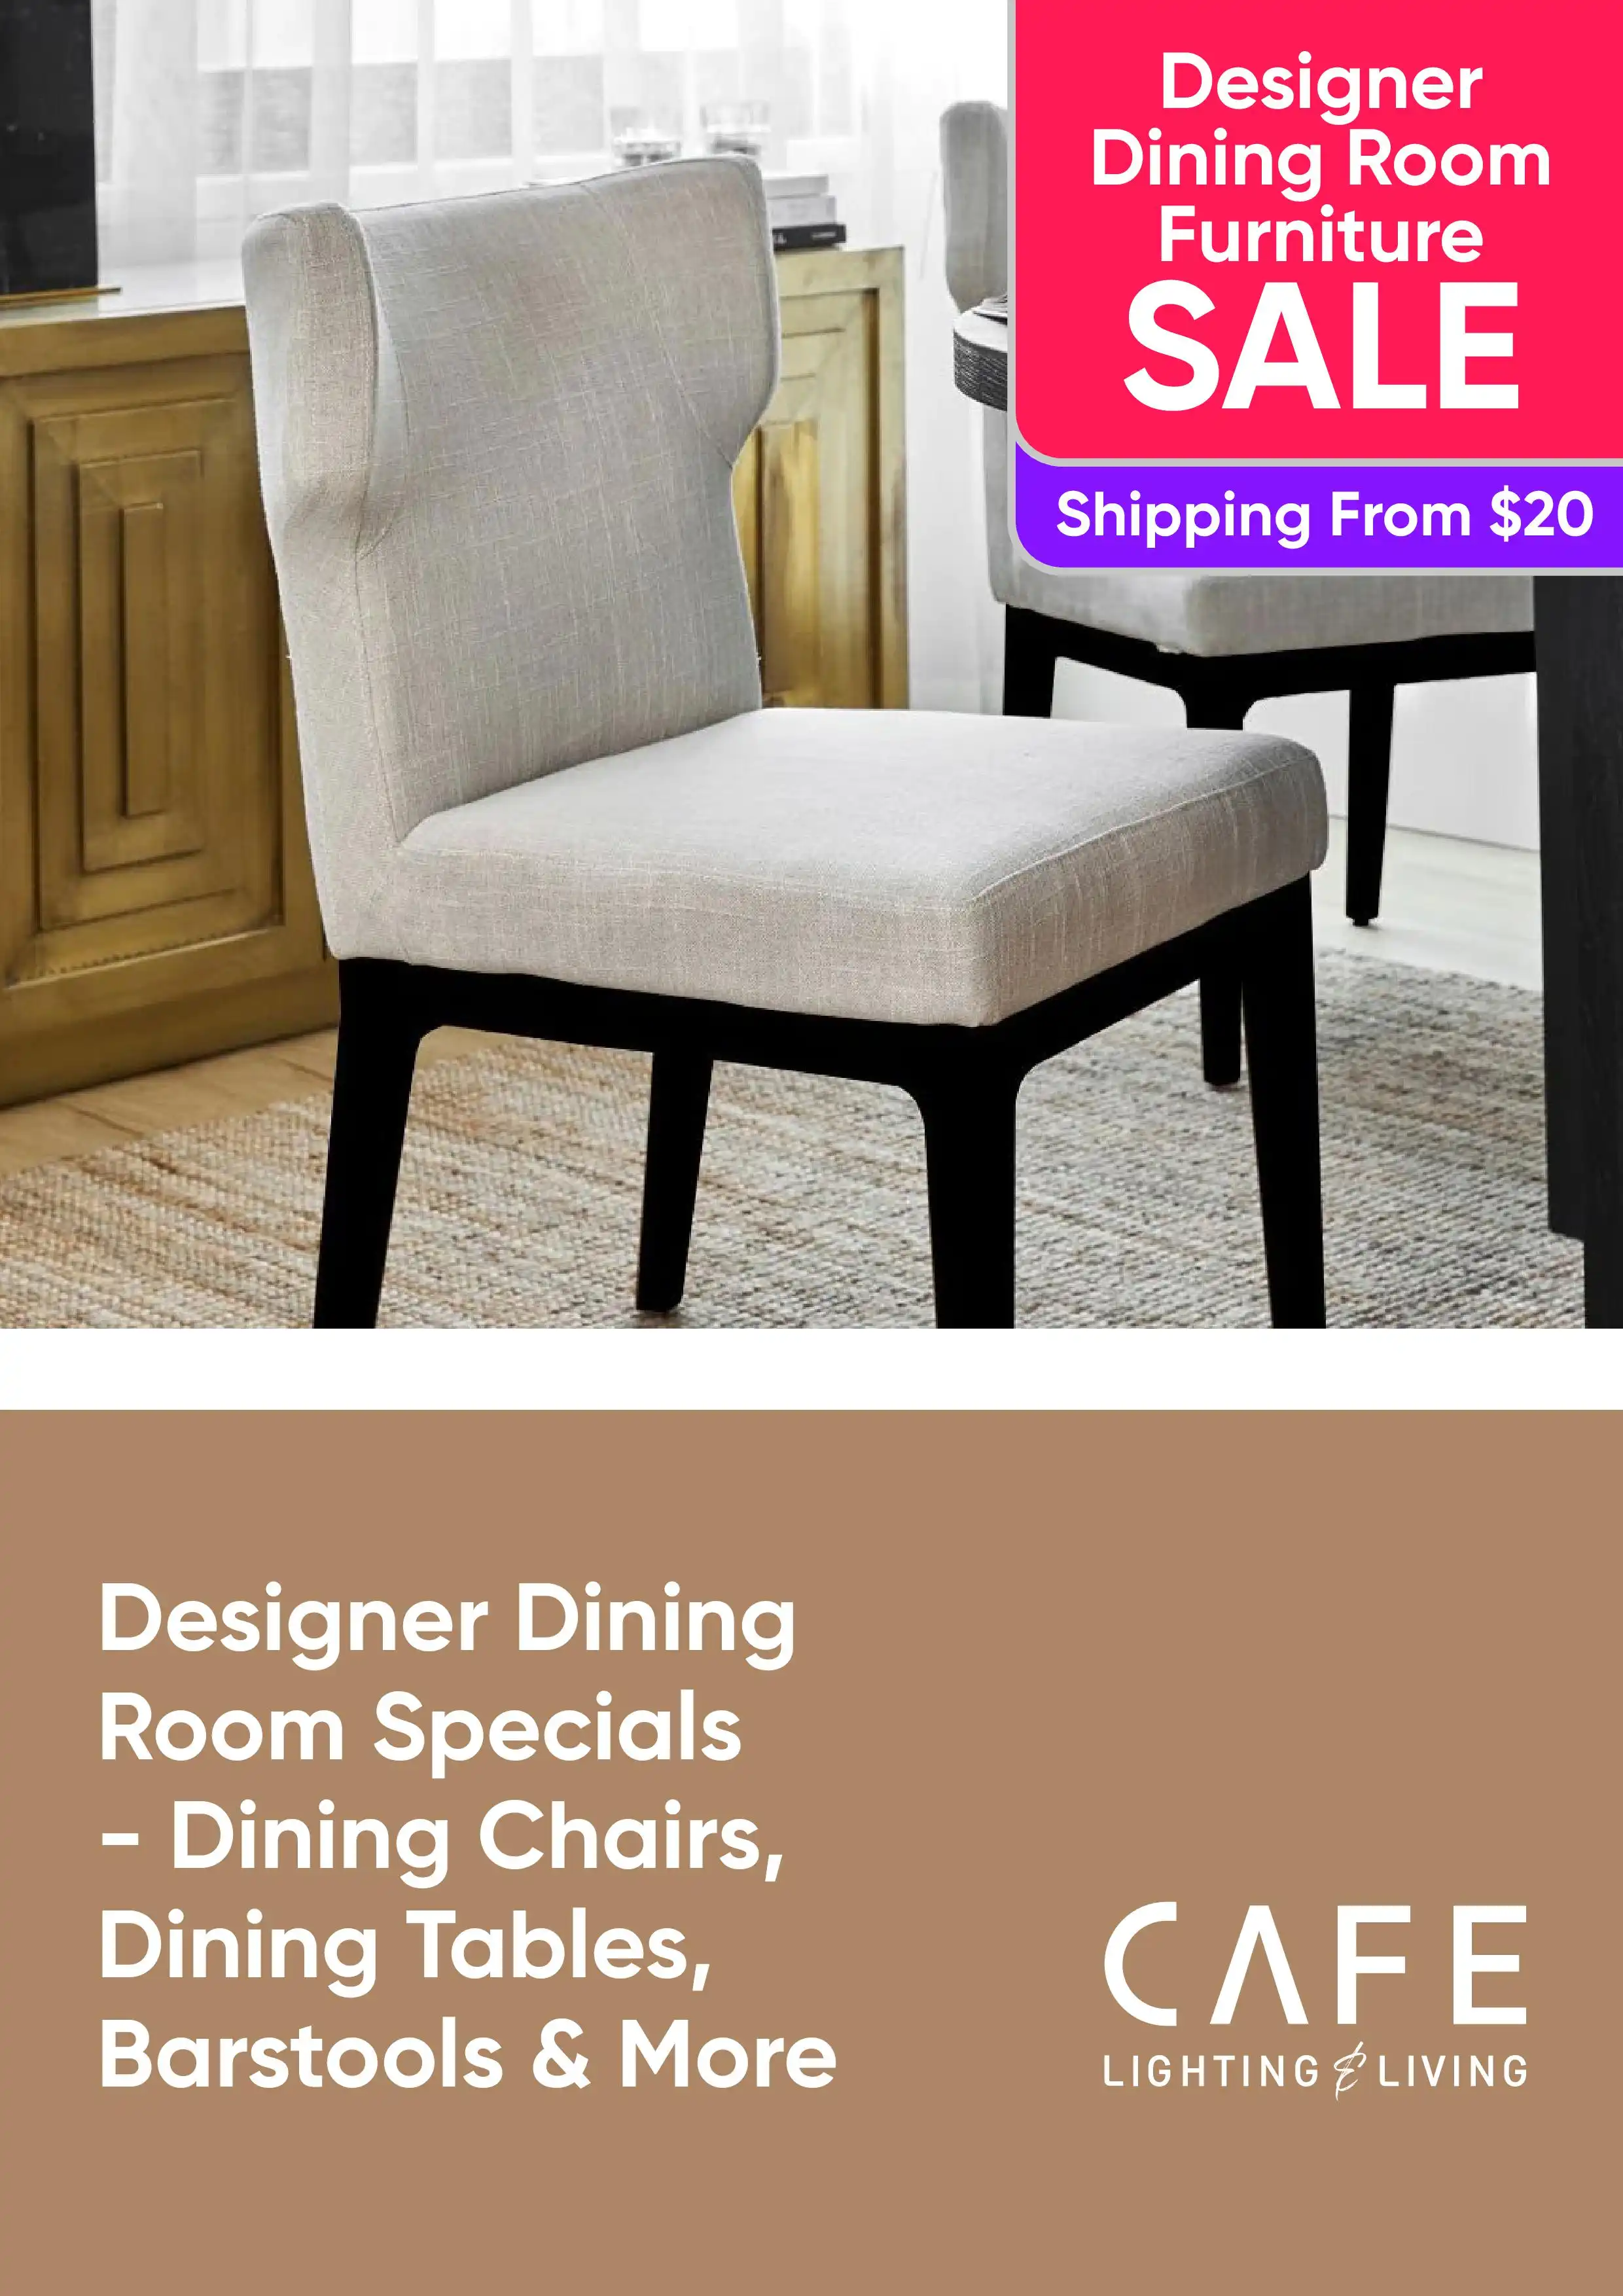 Designer Dining Room Specials - Dining Chairs, Dining Tables, Barstools and More